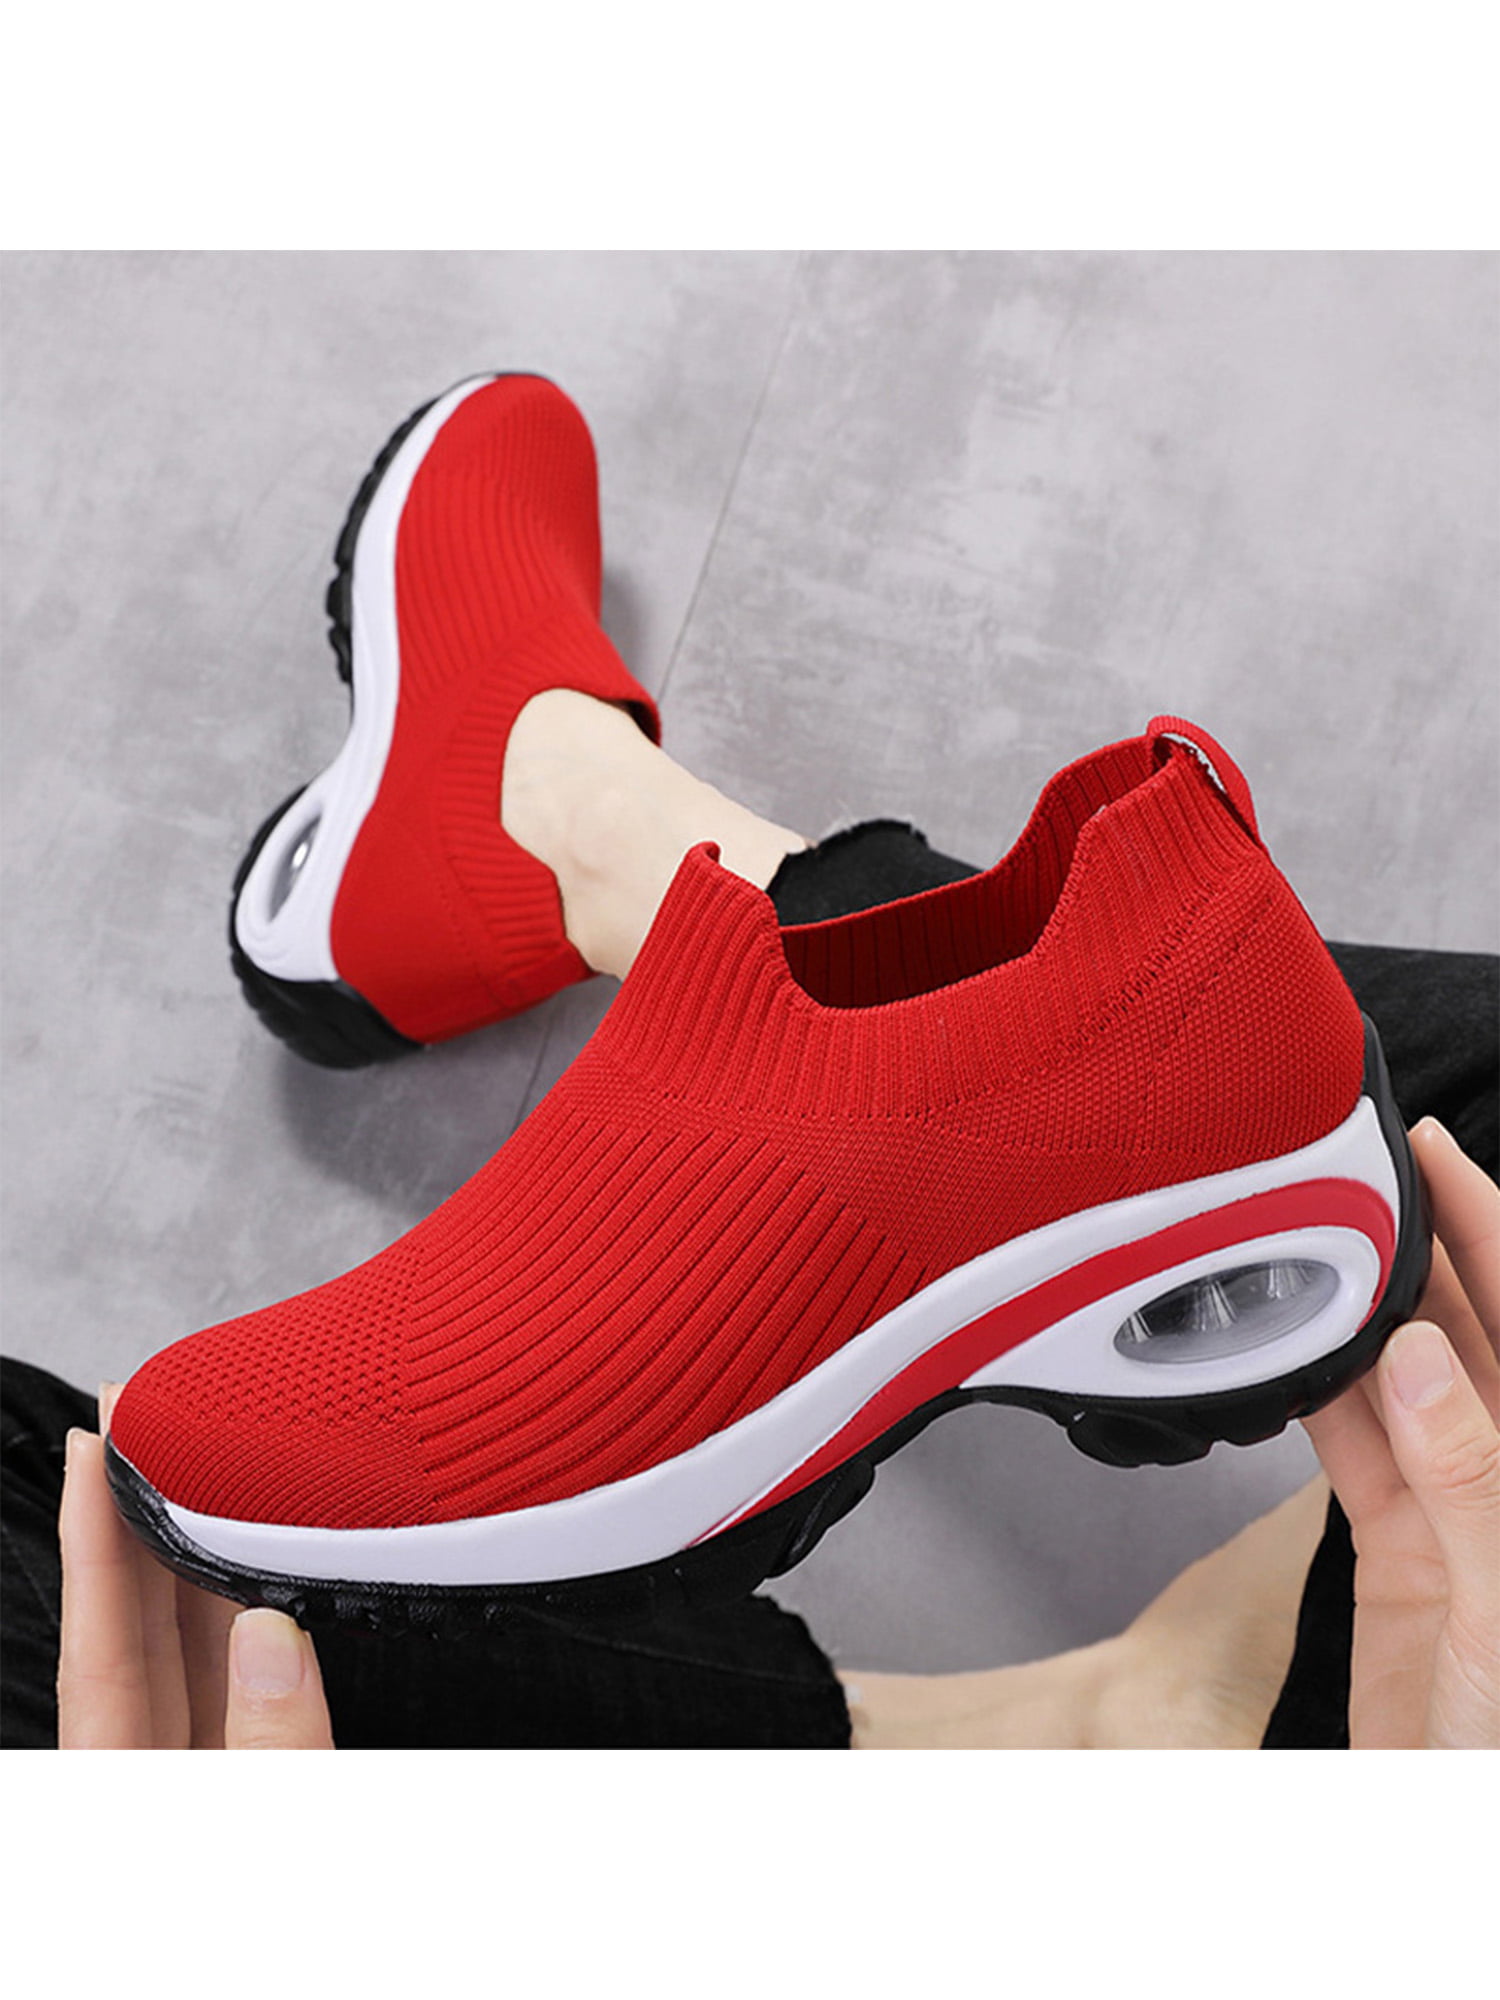 Womens Trainers Running Shoes No Slip Sneakers Nursing Tennis Shoes Sport Casual Walking Shoes Work Jogging Work Workout 